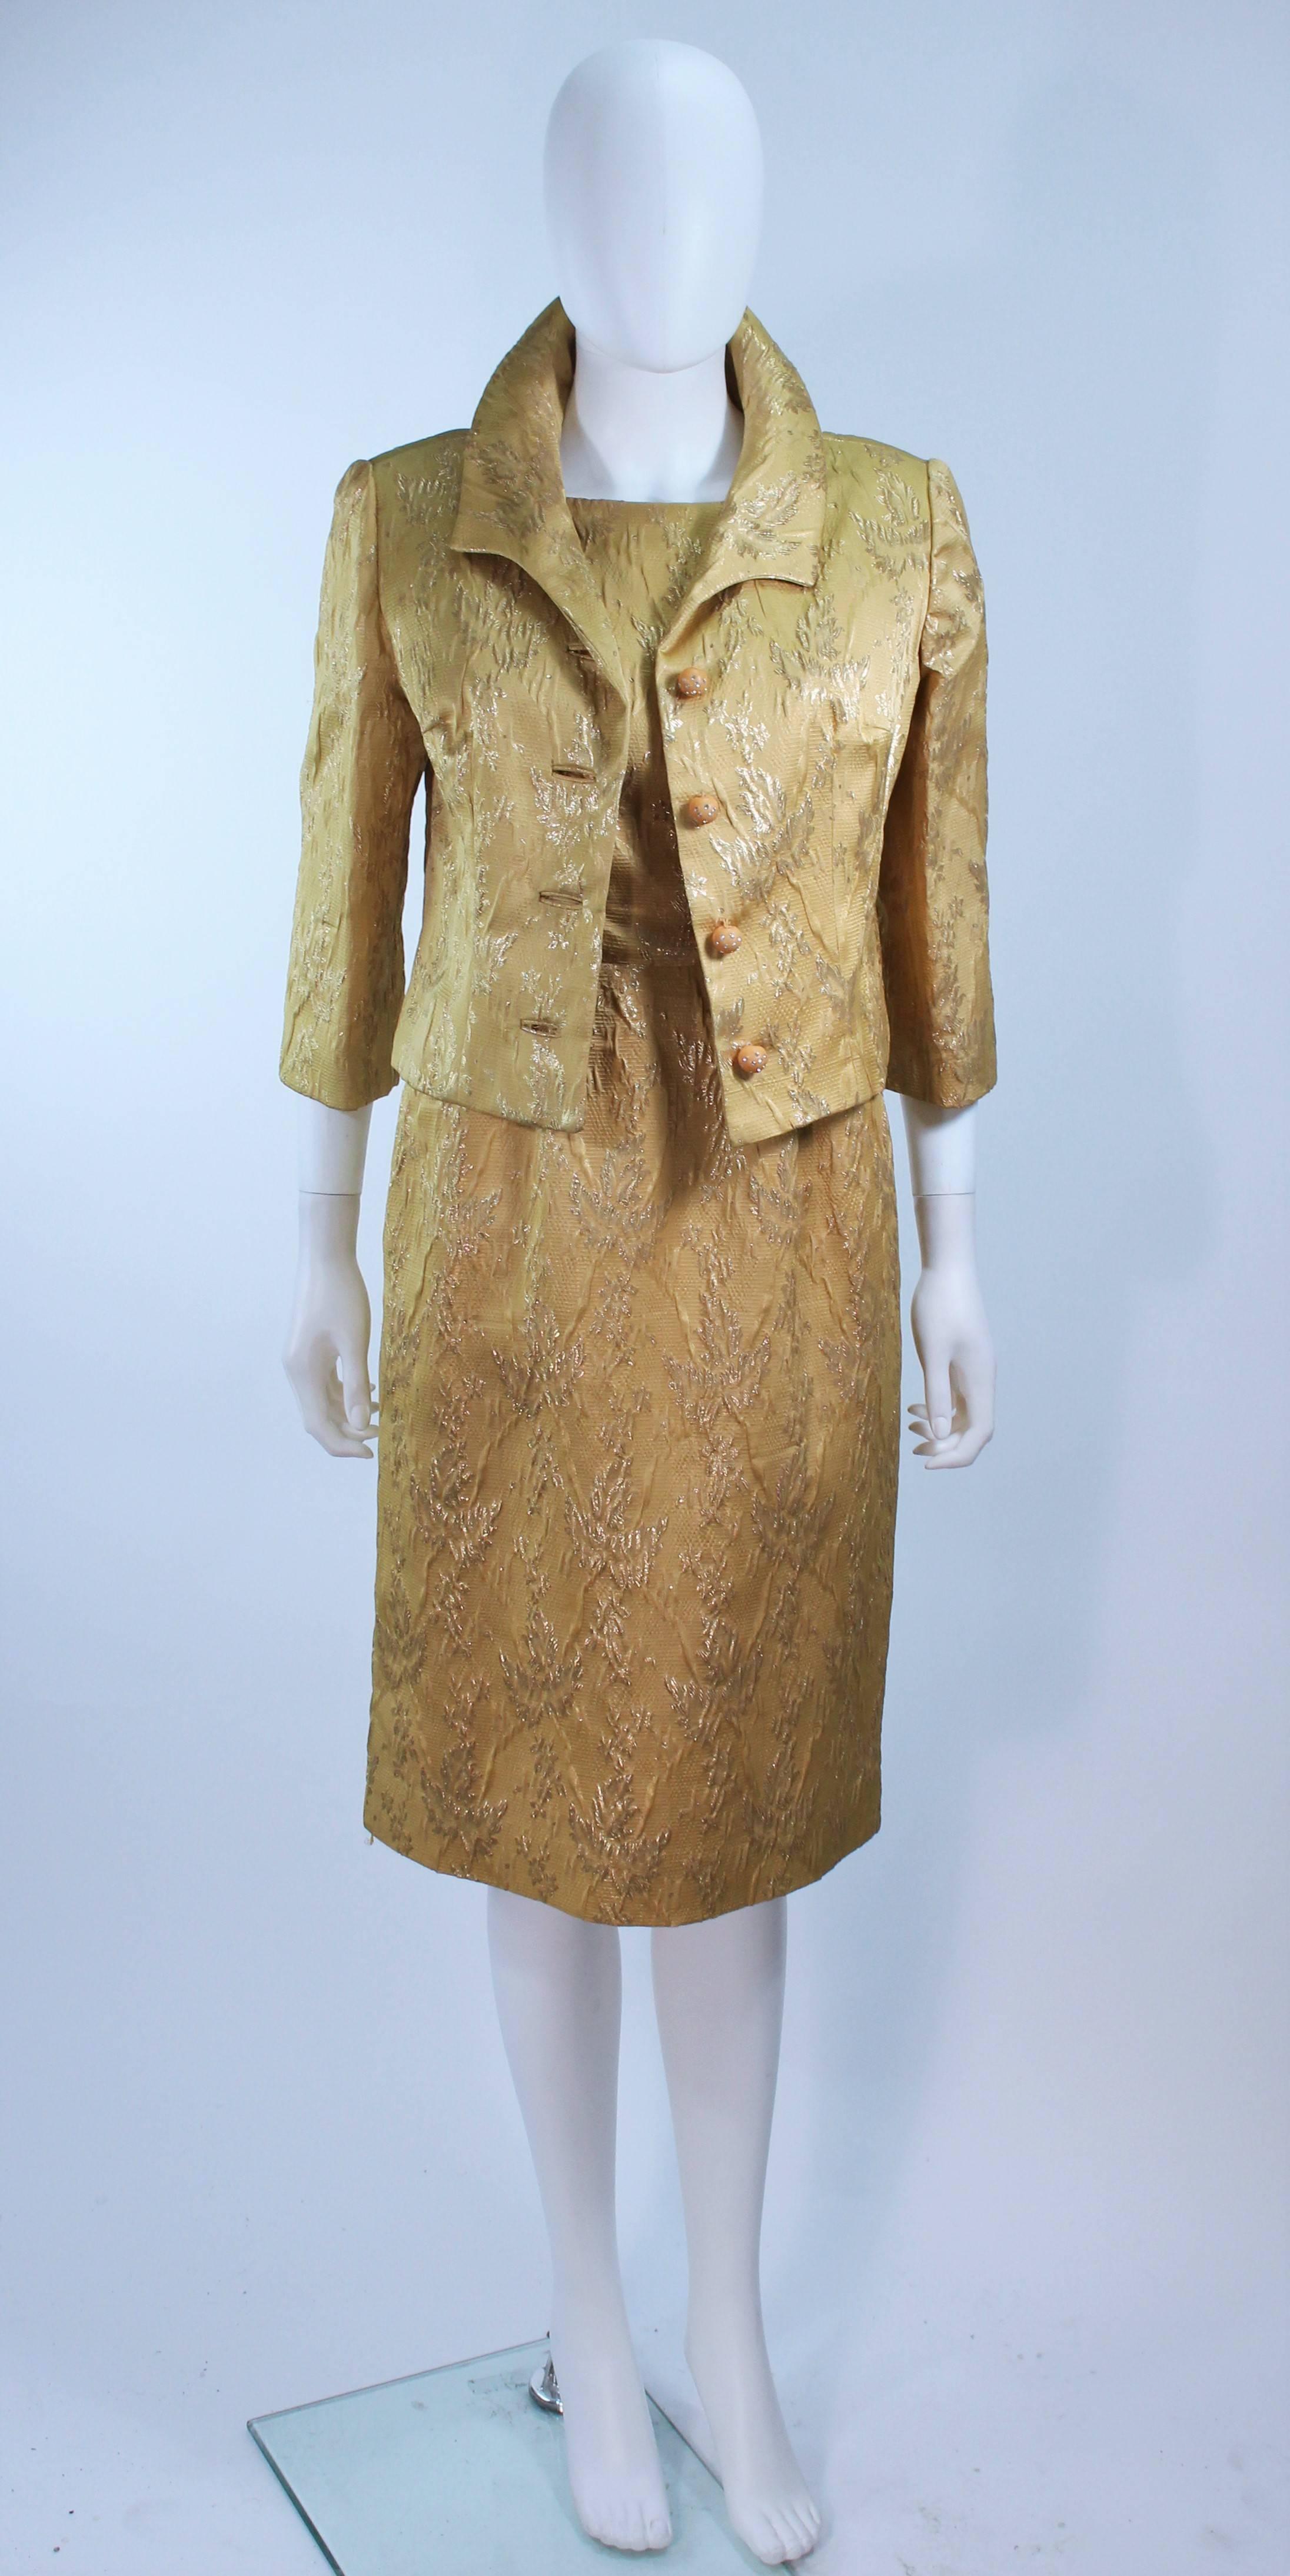 ANDREW ARKON 1960's Yellow Brocade Dress Ensemble Size 4 In Excellent Condition For Sale In Los Angeles, CA